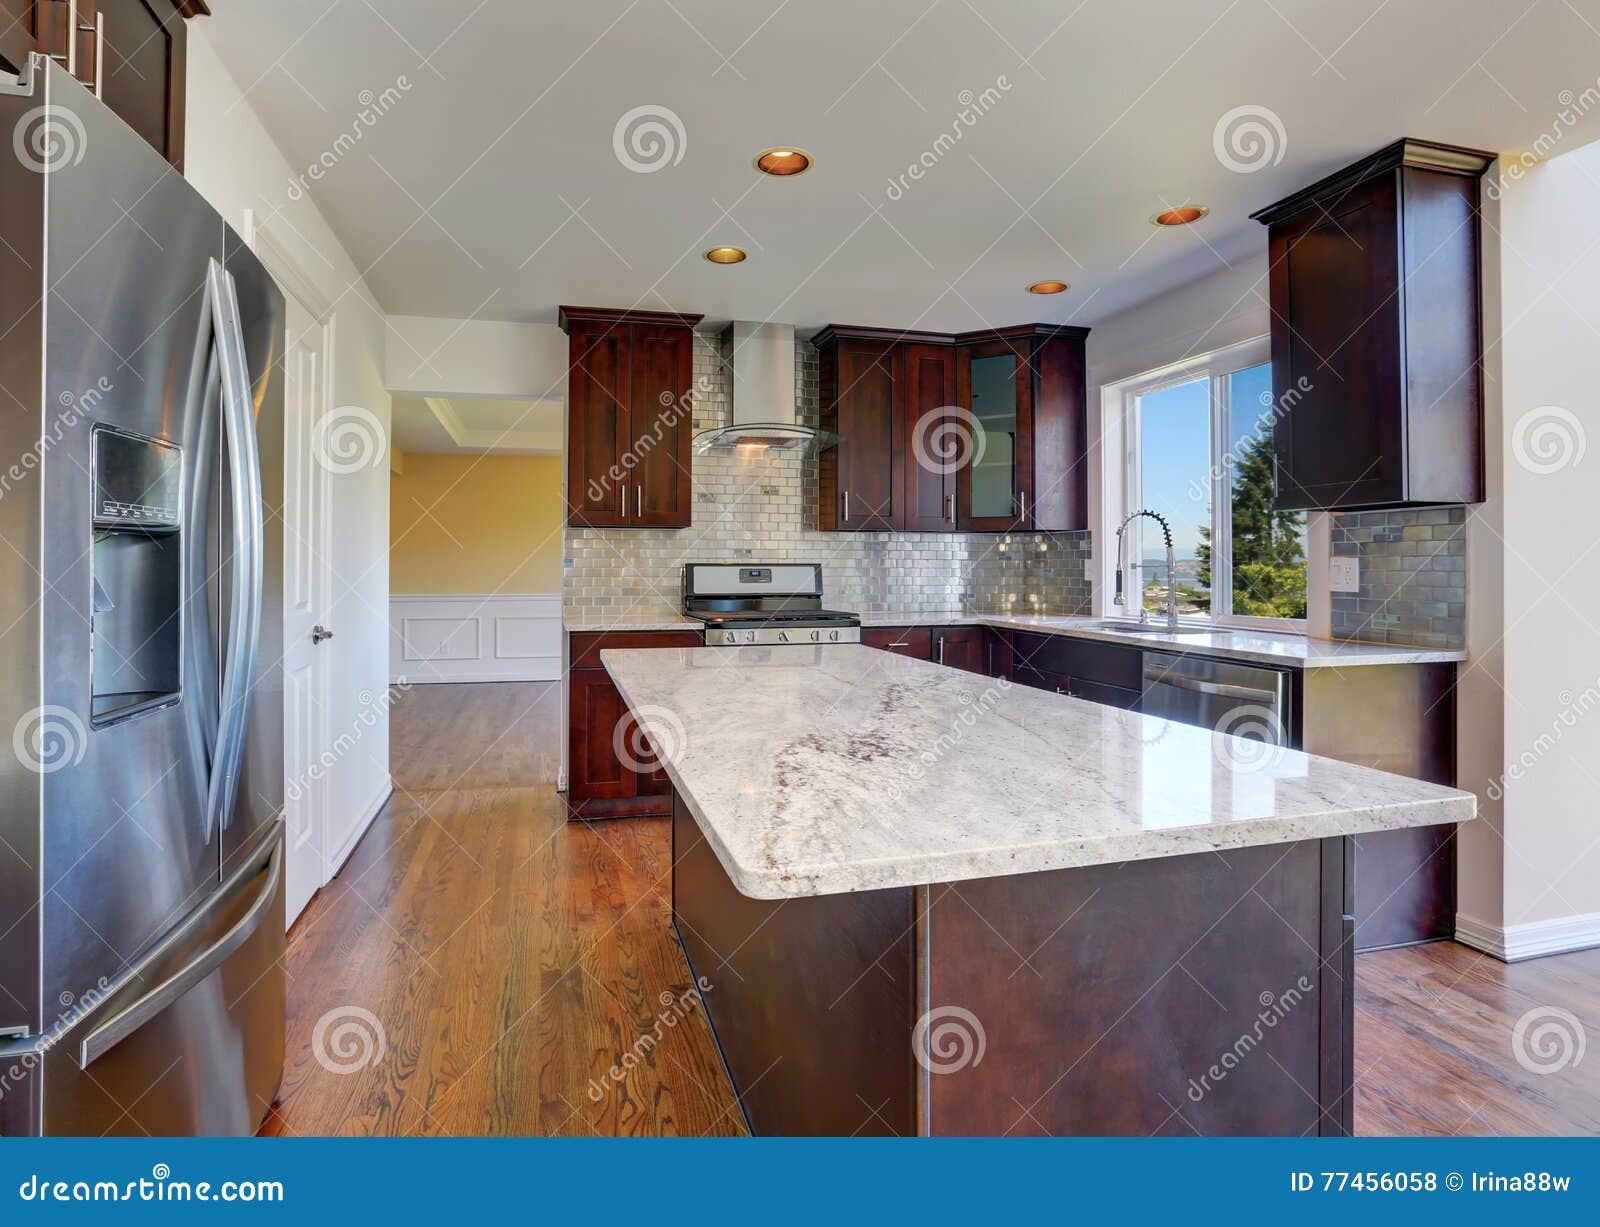 kitchen room interior with deep brown cabinets with granite counter top